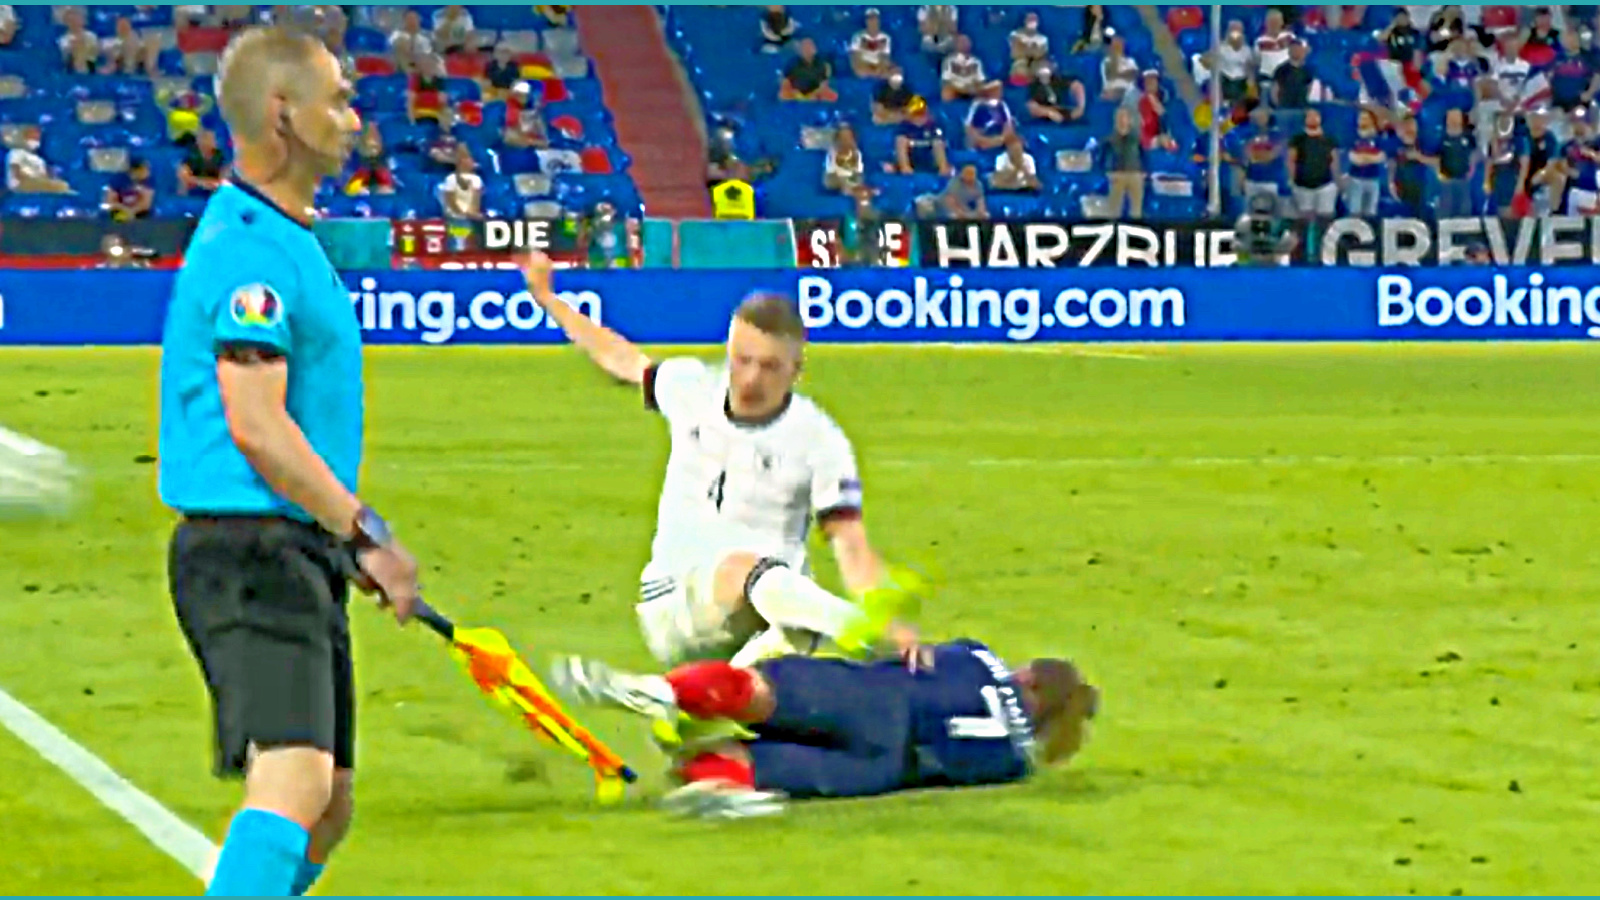 Antoine Griezmann launches a robust tackle on Matthias Ginter during France v Germany